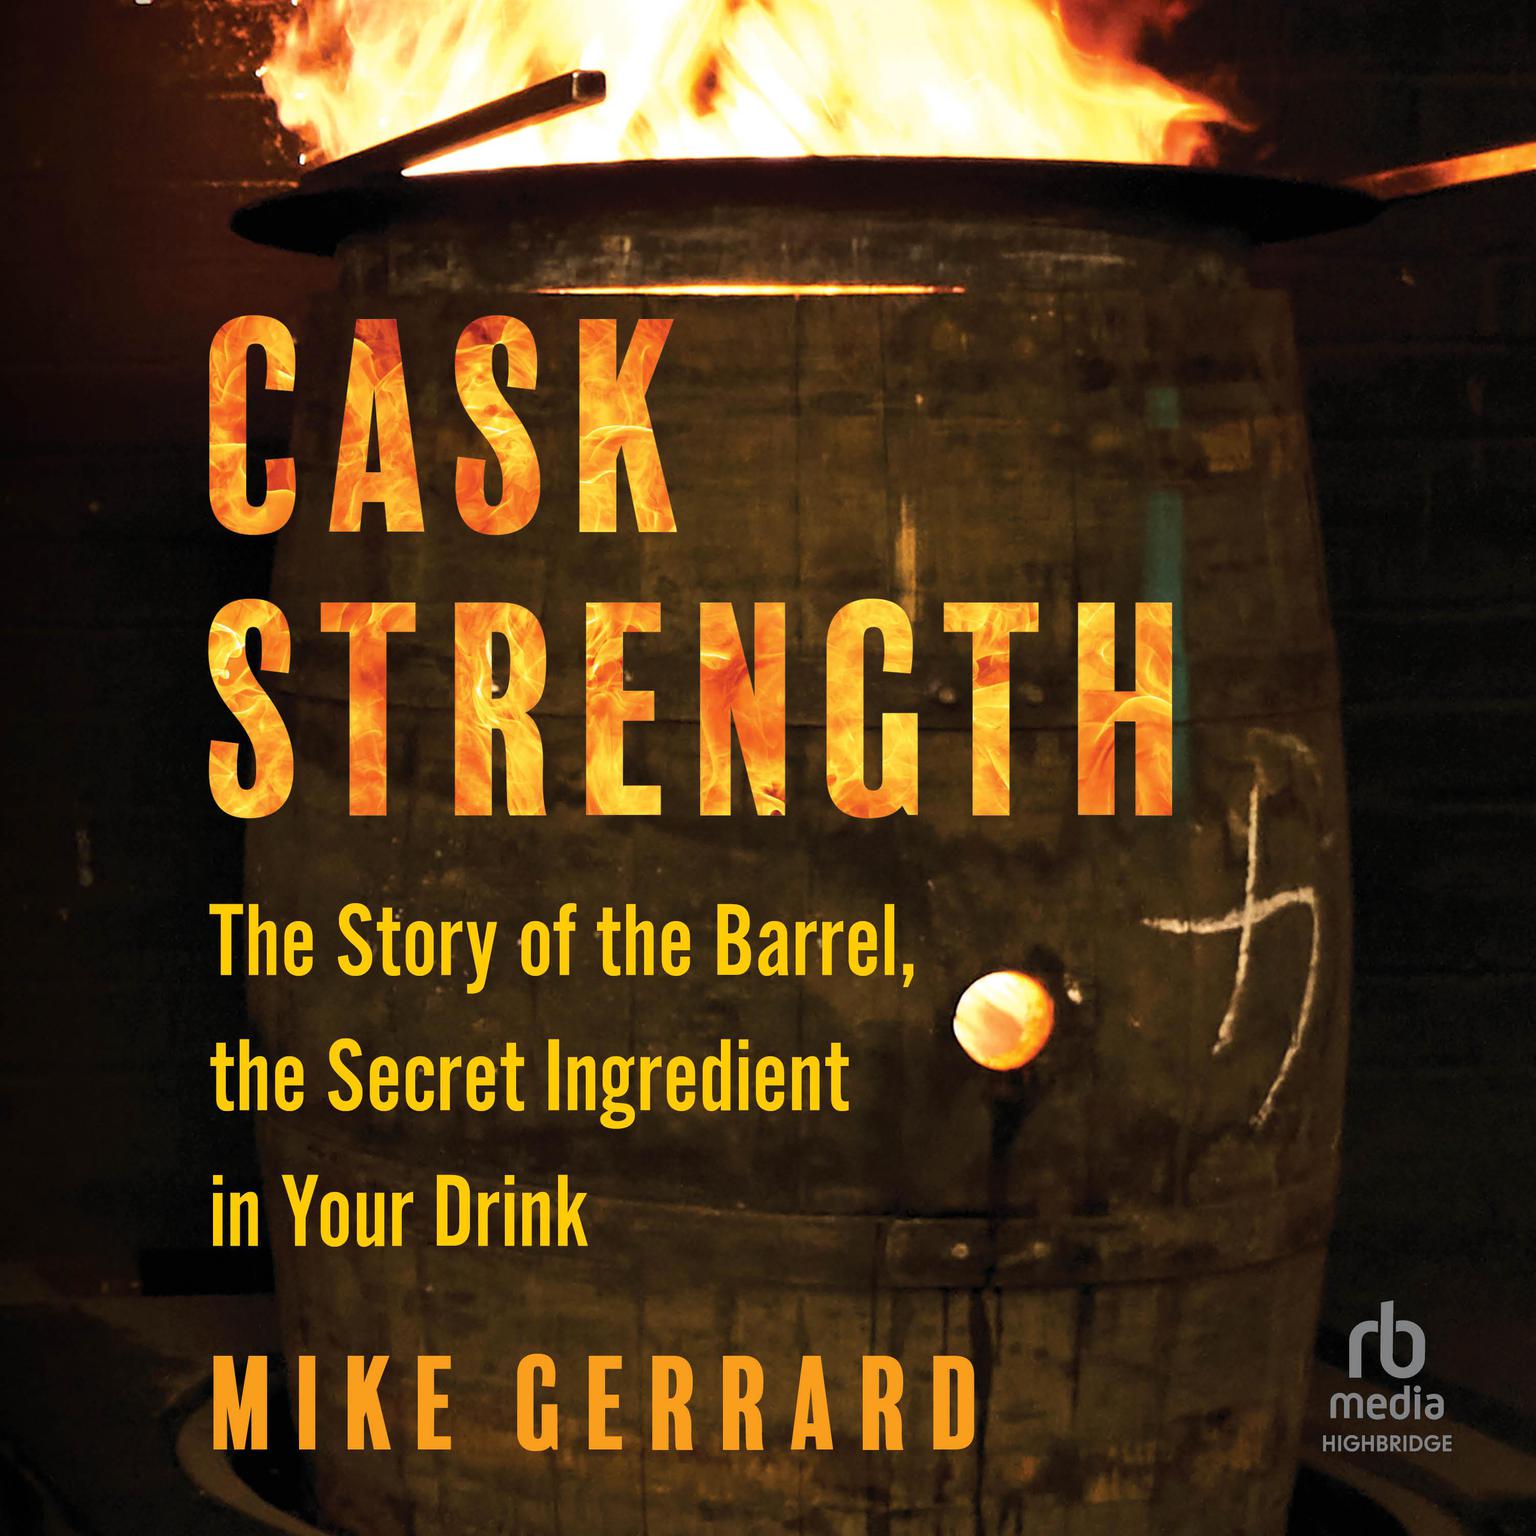 Cask Strength: The Story of the Barrel, the Secret Ingredient in Your Drink Audiobook, by Mike Gerrard